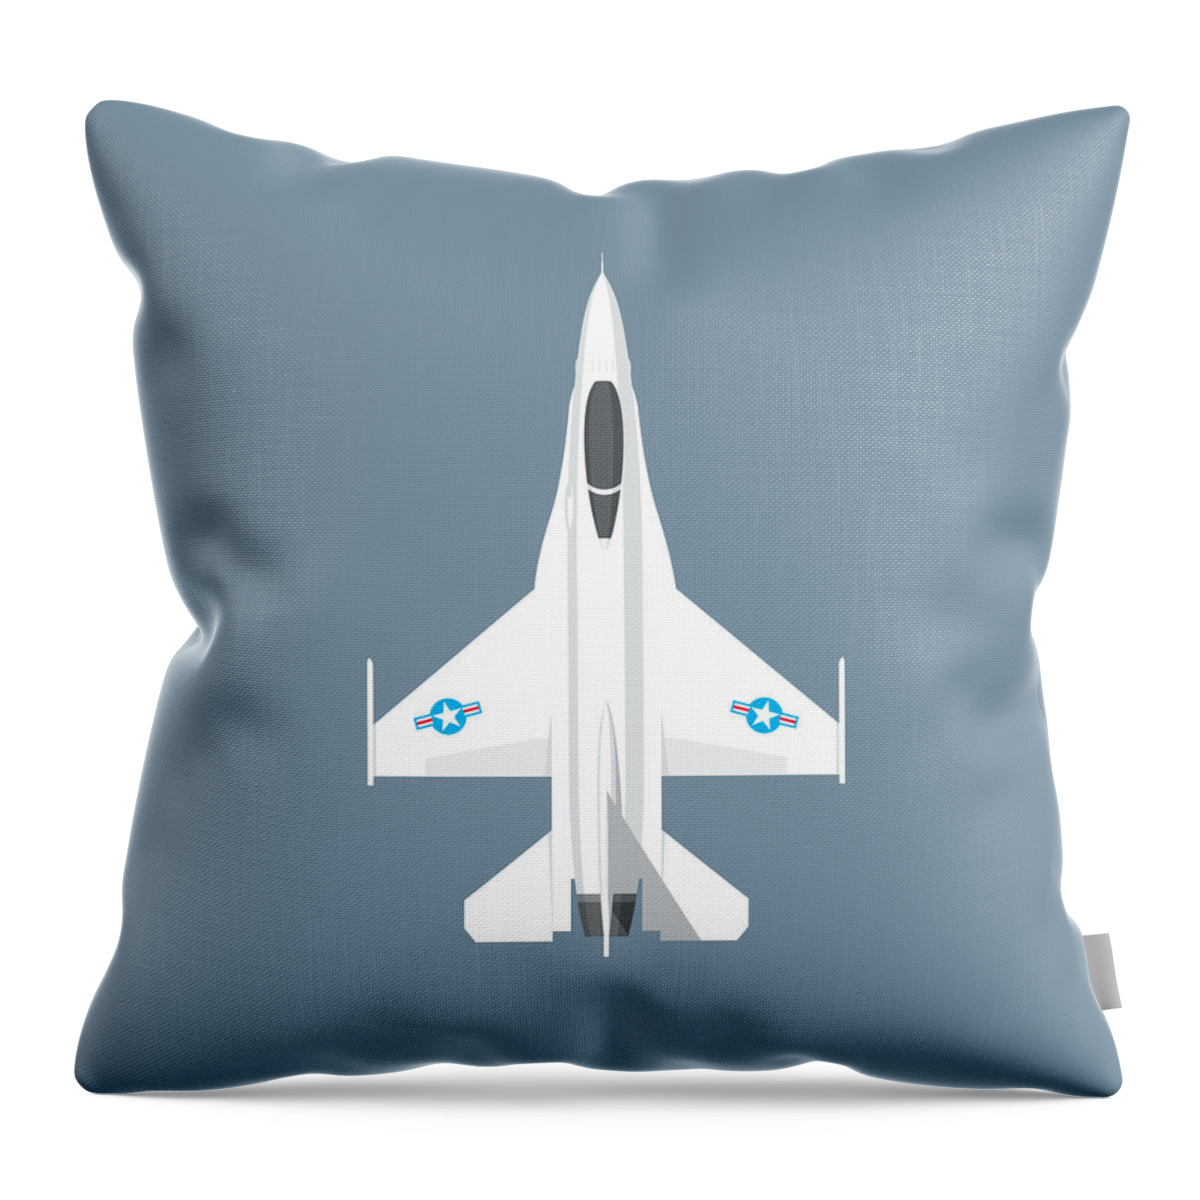 Fighter Throw Pillow featuring the digital art F-16 Falcon Fighter Jet Aircraft - Slate by Organic Synthesis